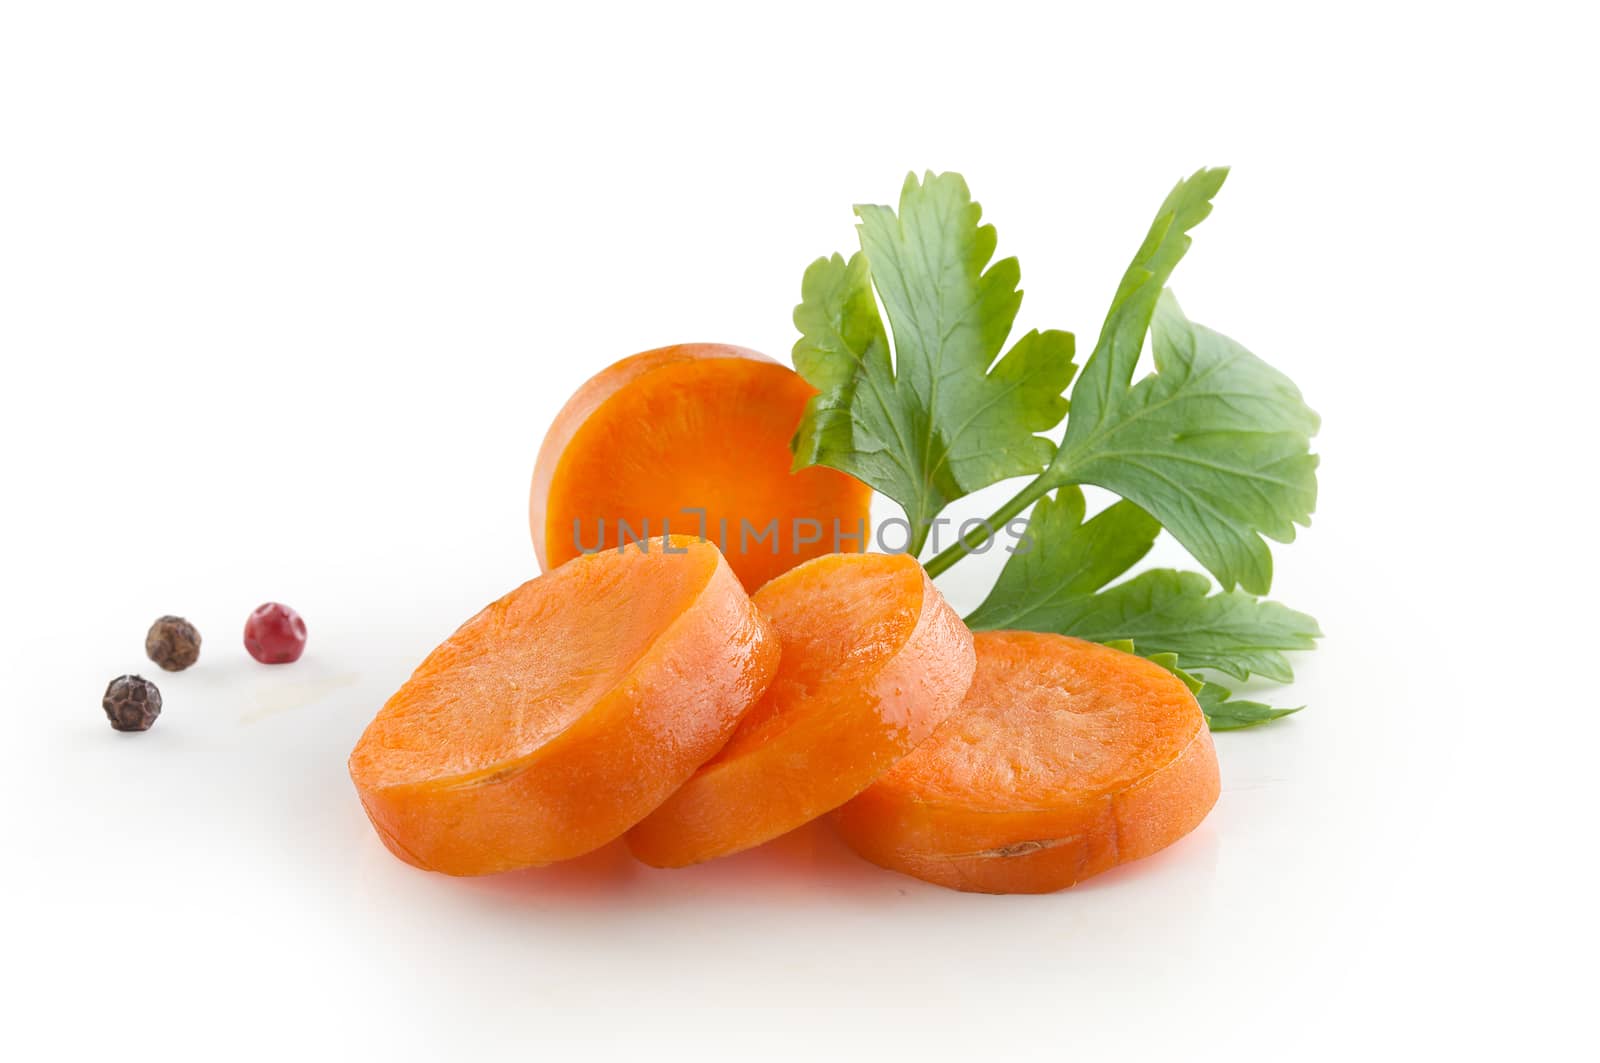 Hanfdul of orange sliced carrot with a fresh green parsley and pepper